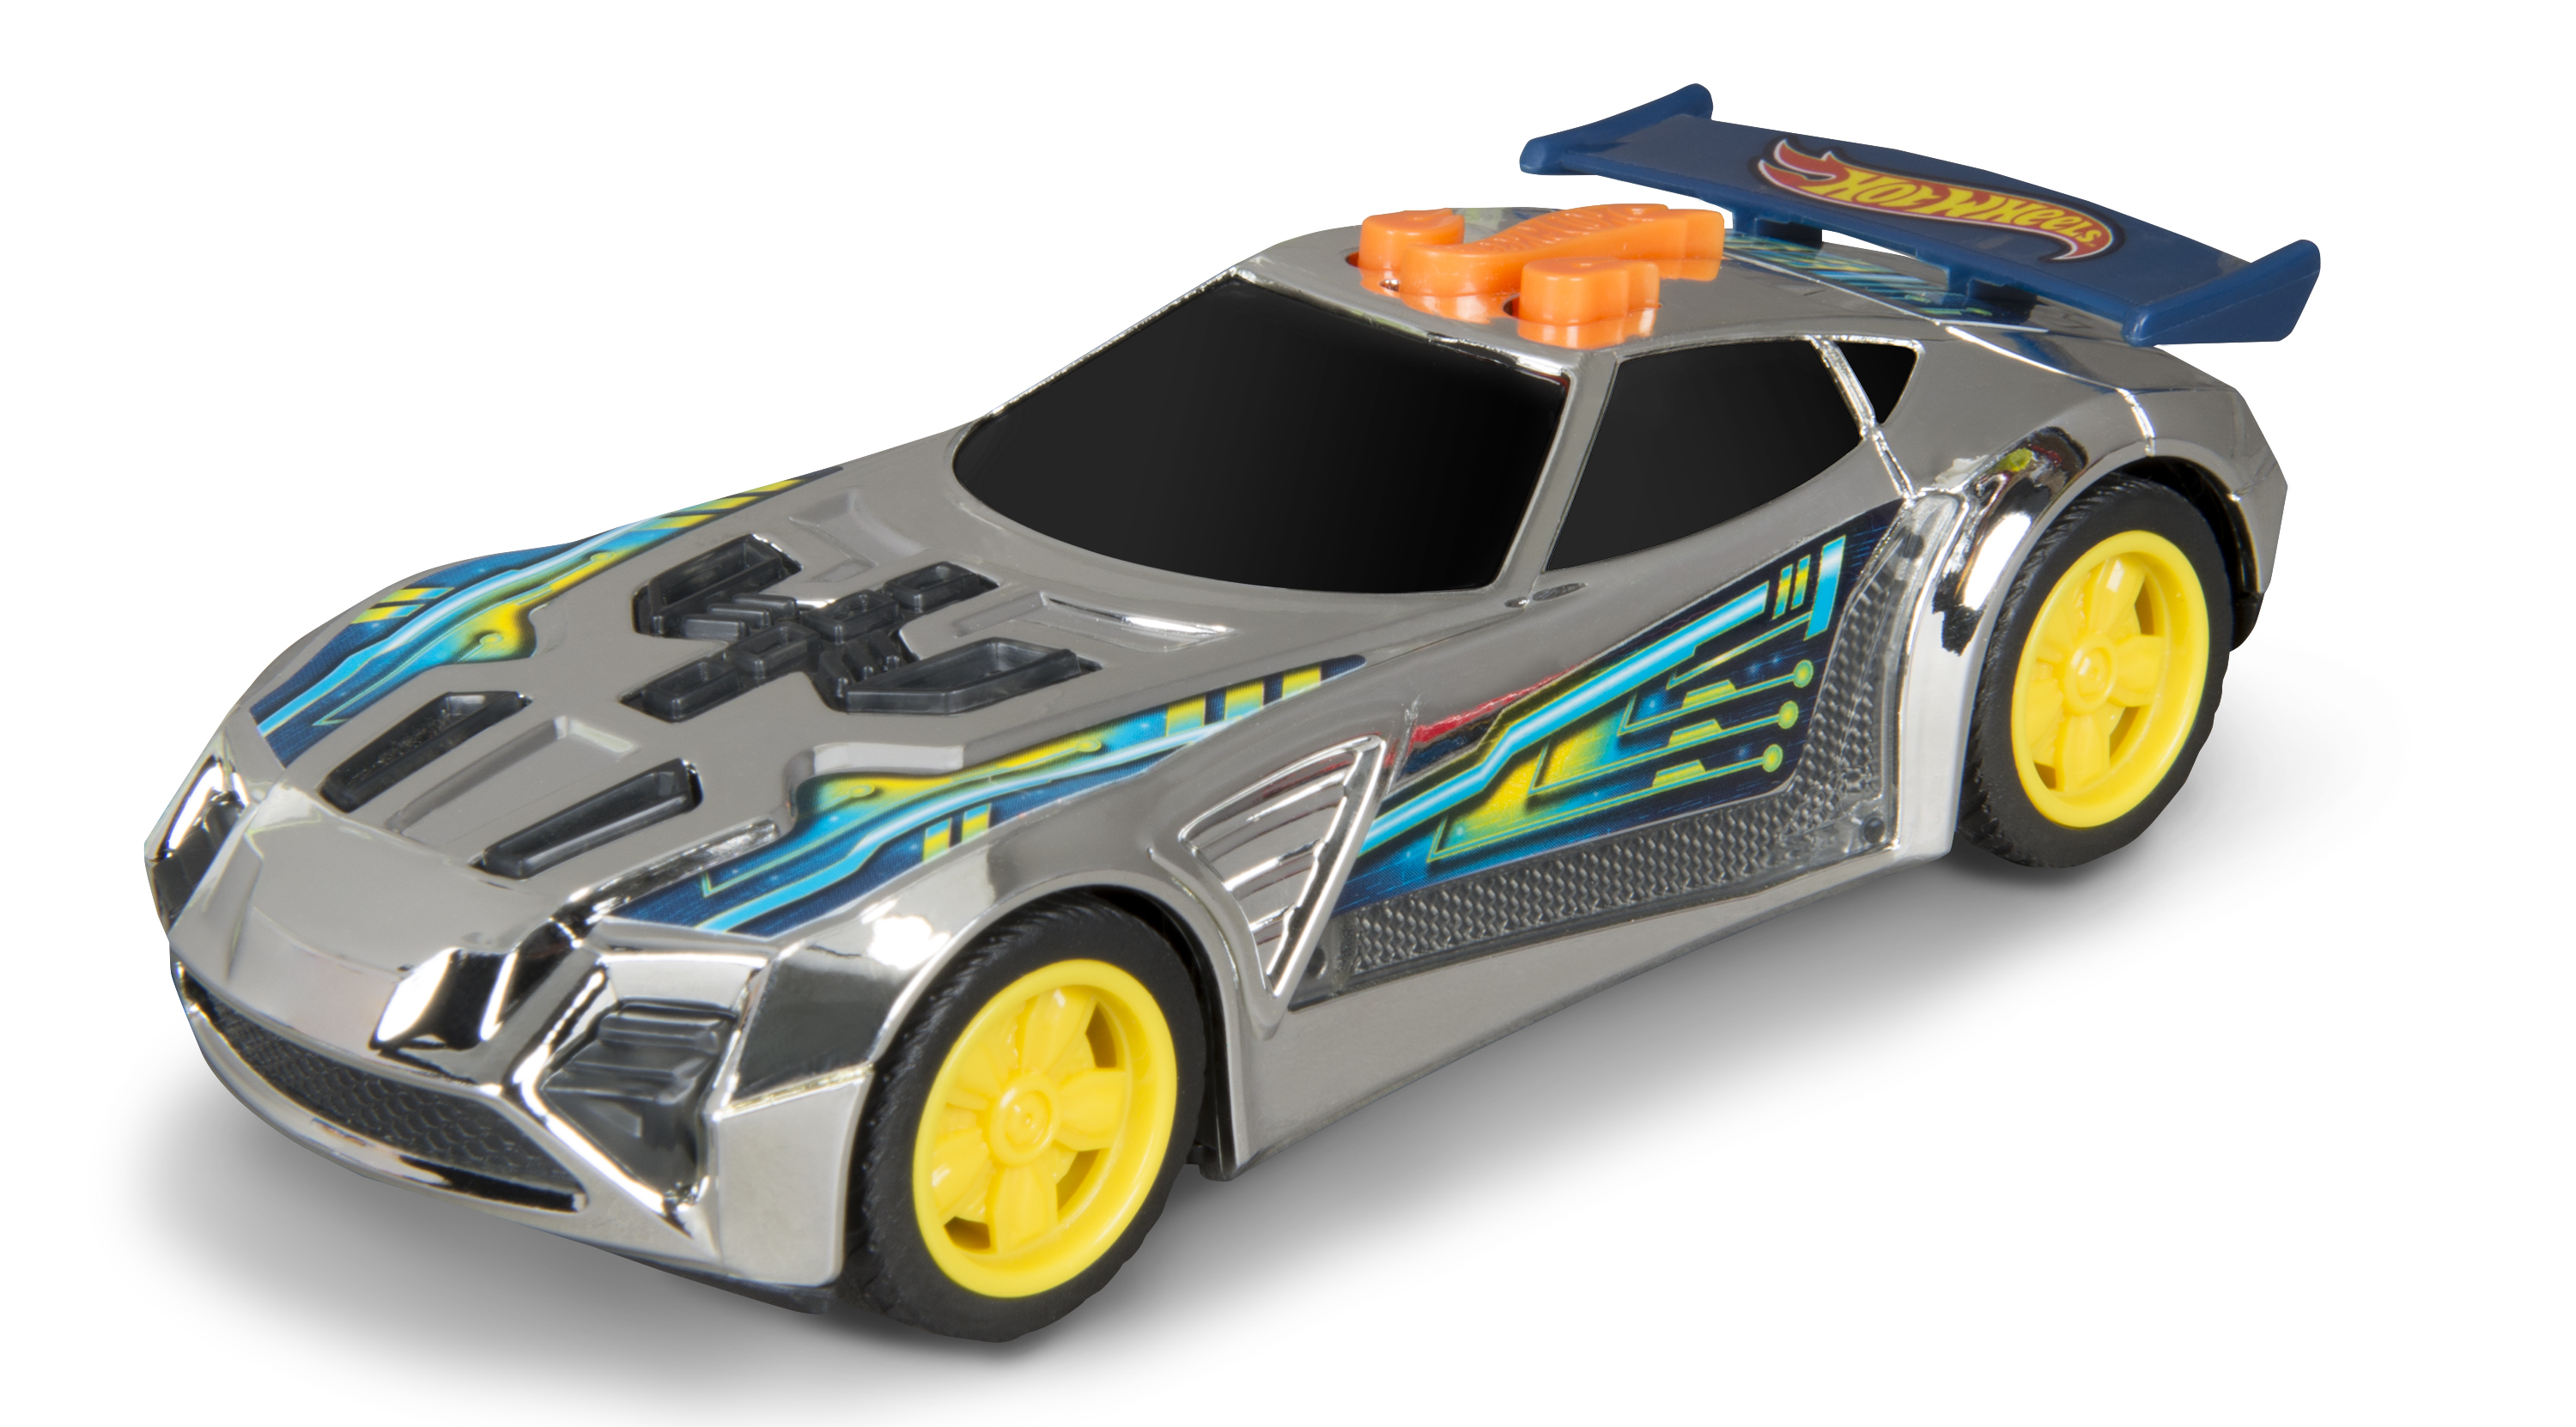 Hot Wheels Edge Glow Cruisers - Nerve Hammer with Lights and Sounds - image 3 of 4